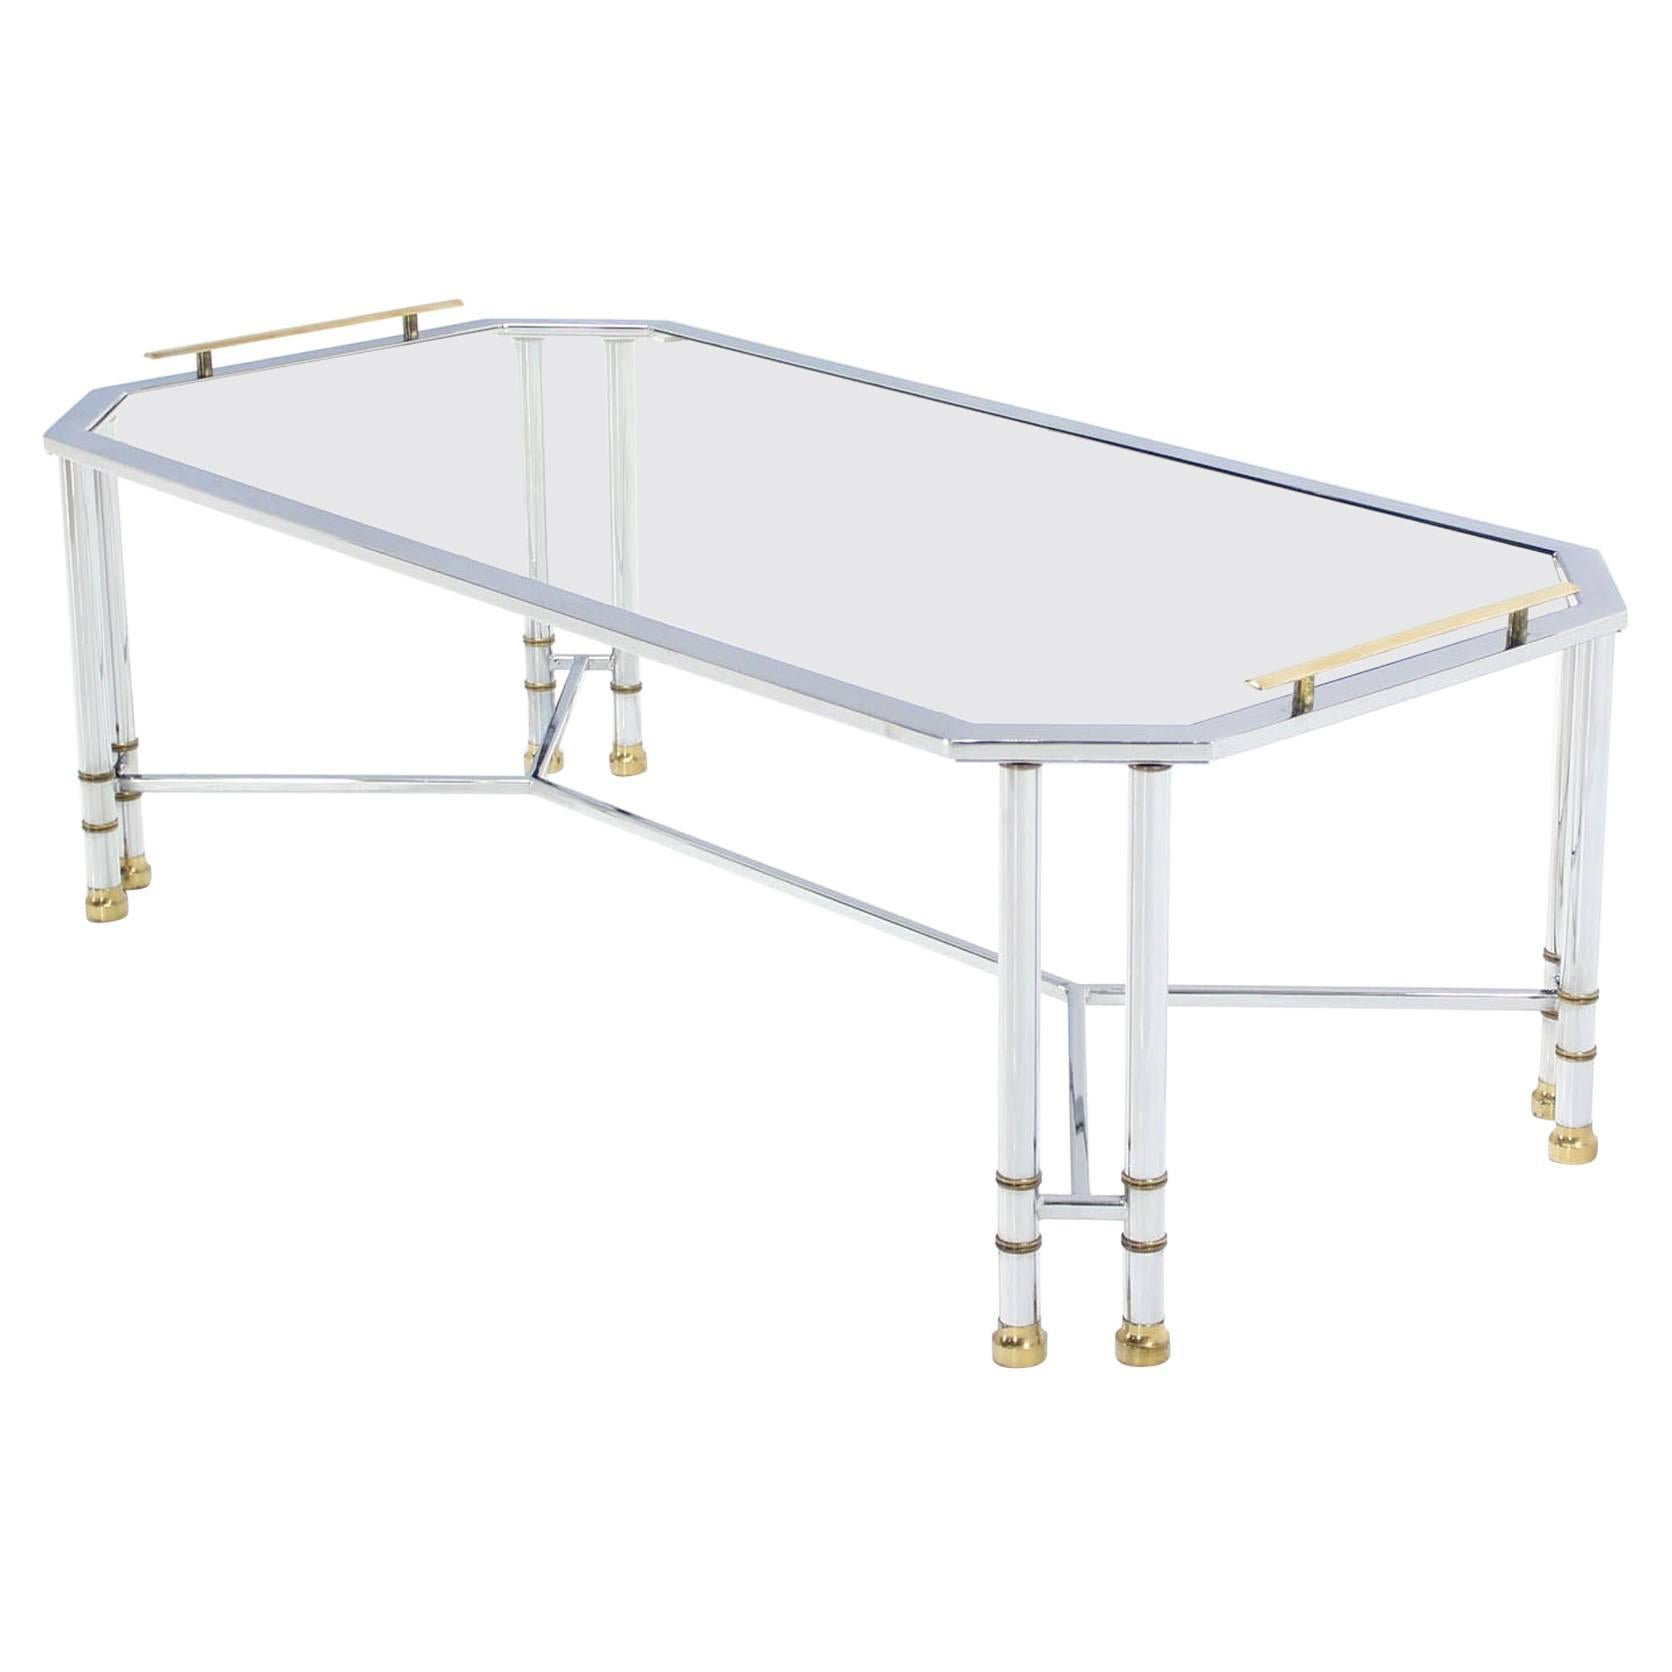 Rectangular Chrome Brass Glass Coffee Table Tray Style Mid Century Modern For Sale